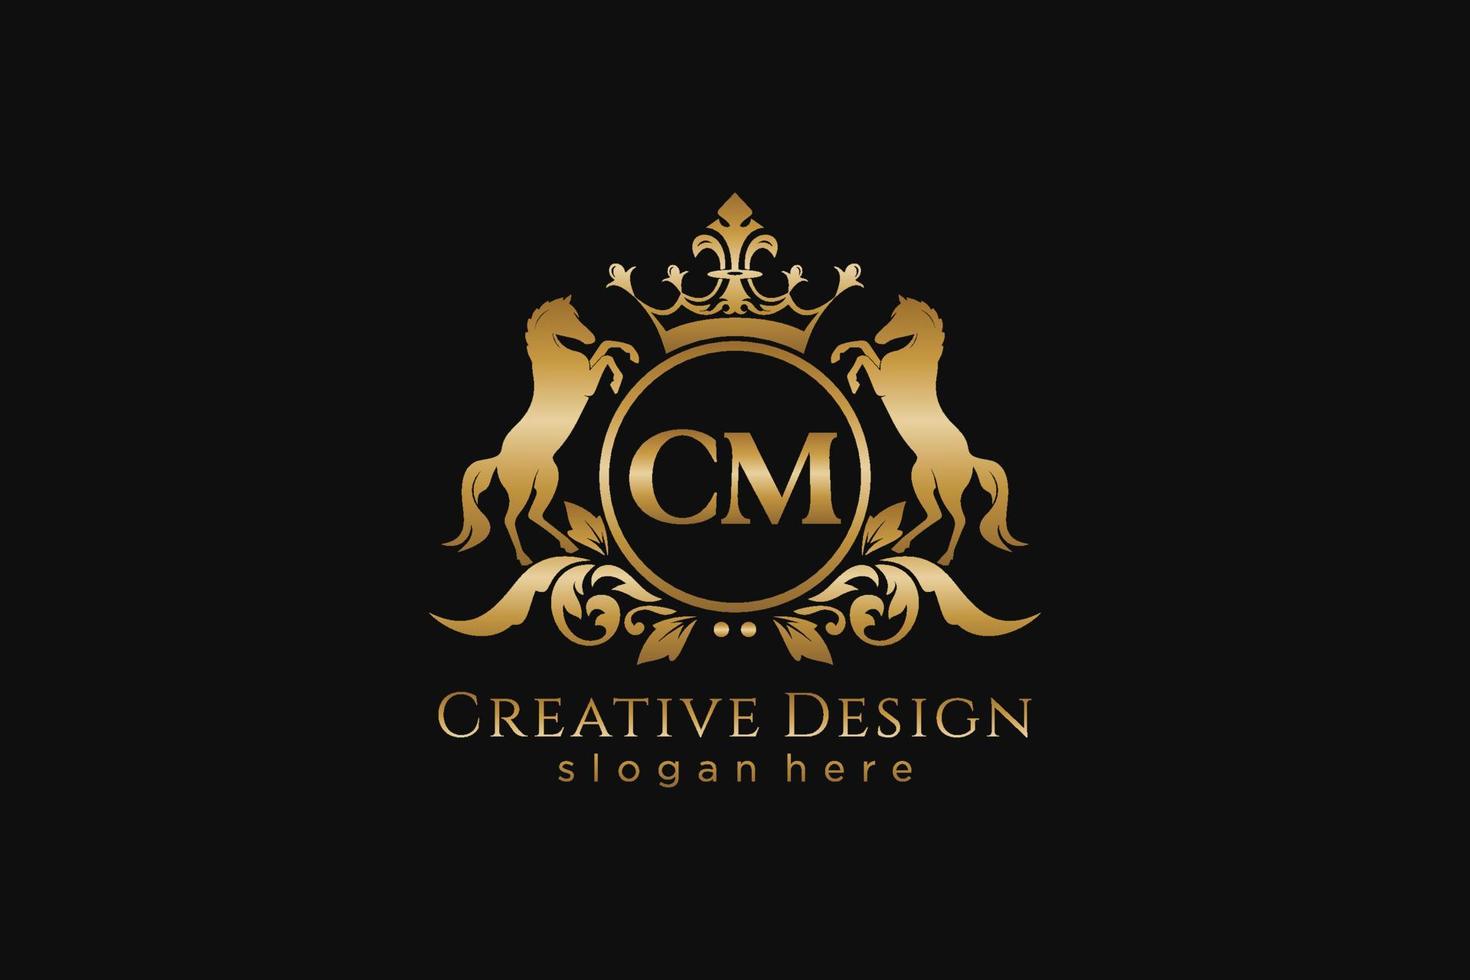 initial CM Retro golden crest with circle and two horses, badge template with scrolls and royal crown - perfect for luxurious branding projects vector